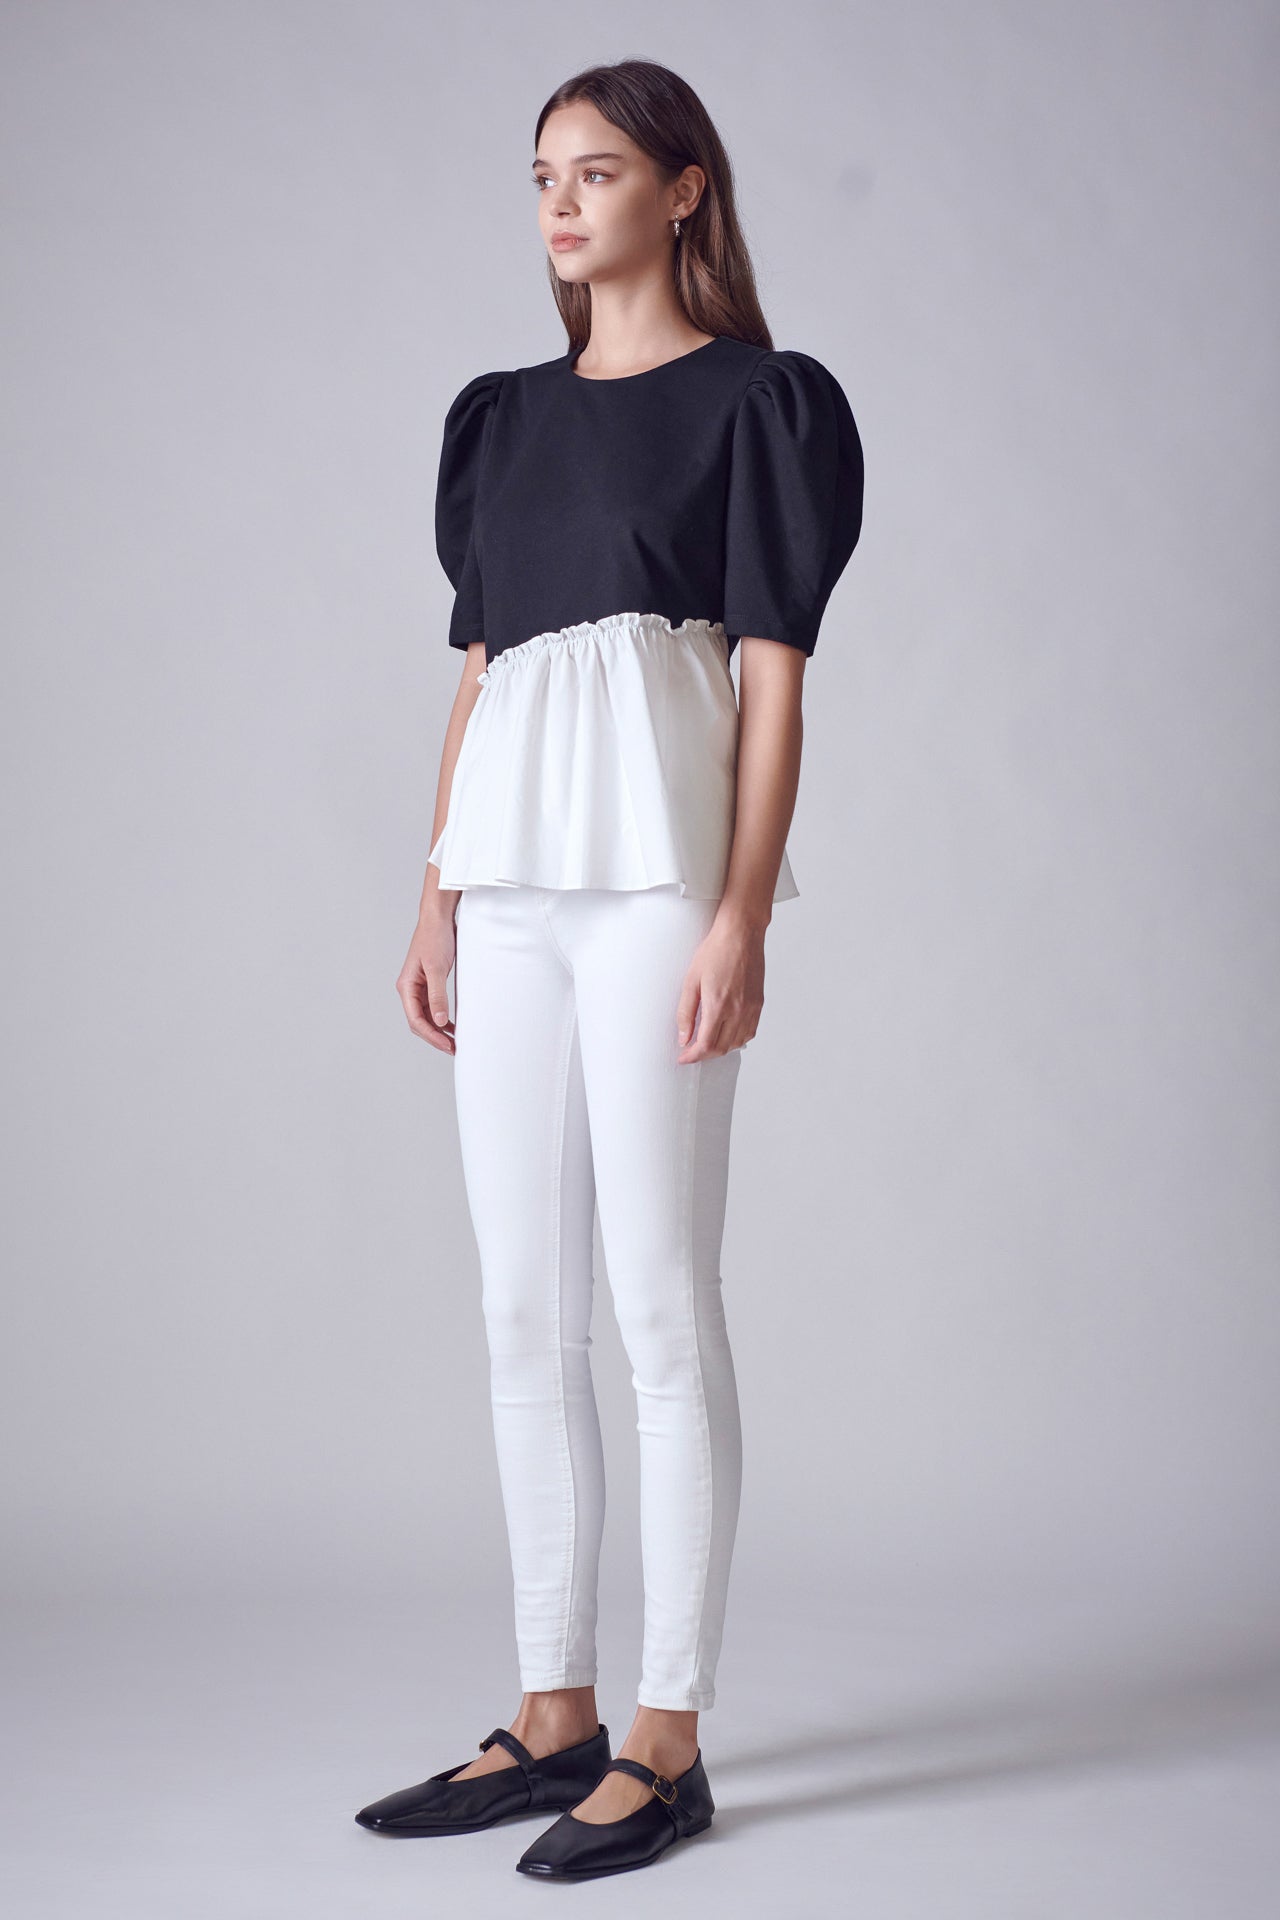 ENGLISH FACTORY - Mixed Media Asymmetrical Top - TOPS available at Objectrare